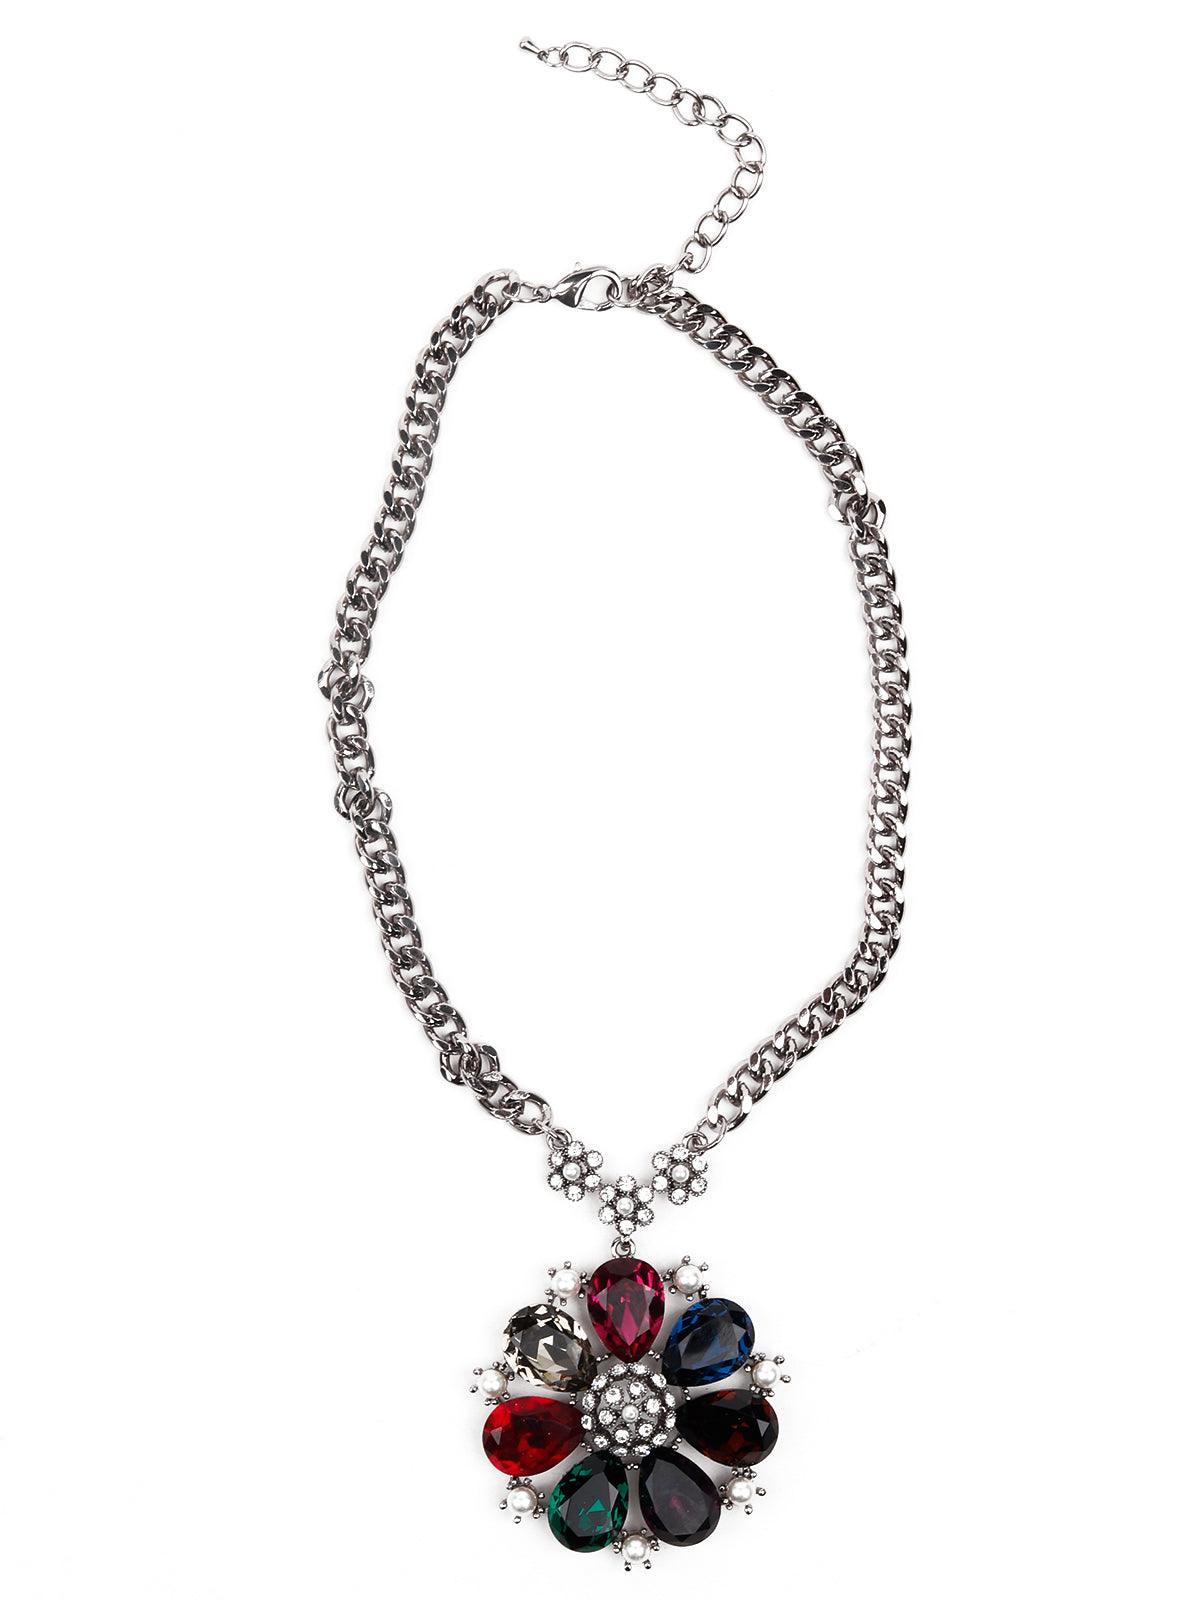 Women's Silver-Tone Necklace With A Floral Pendant - Odette